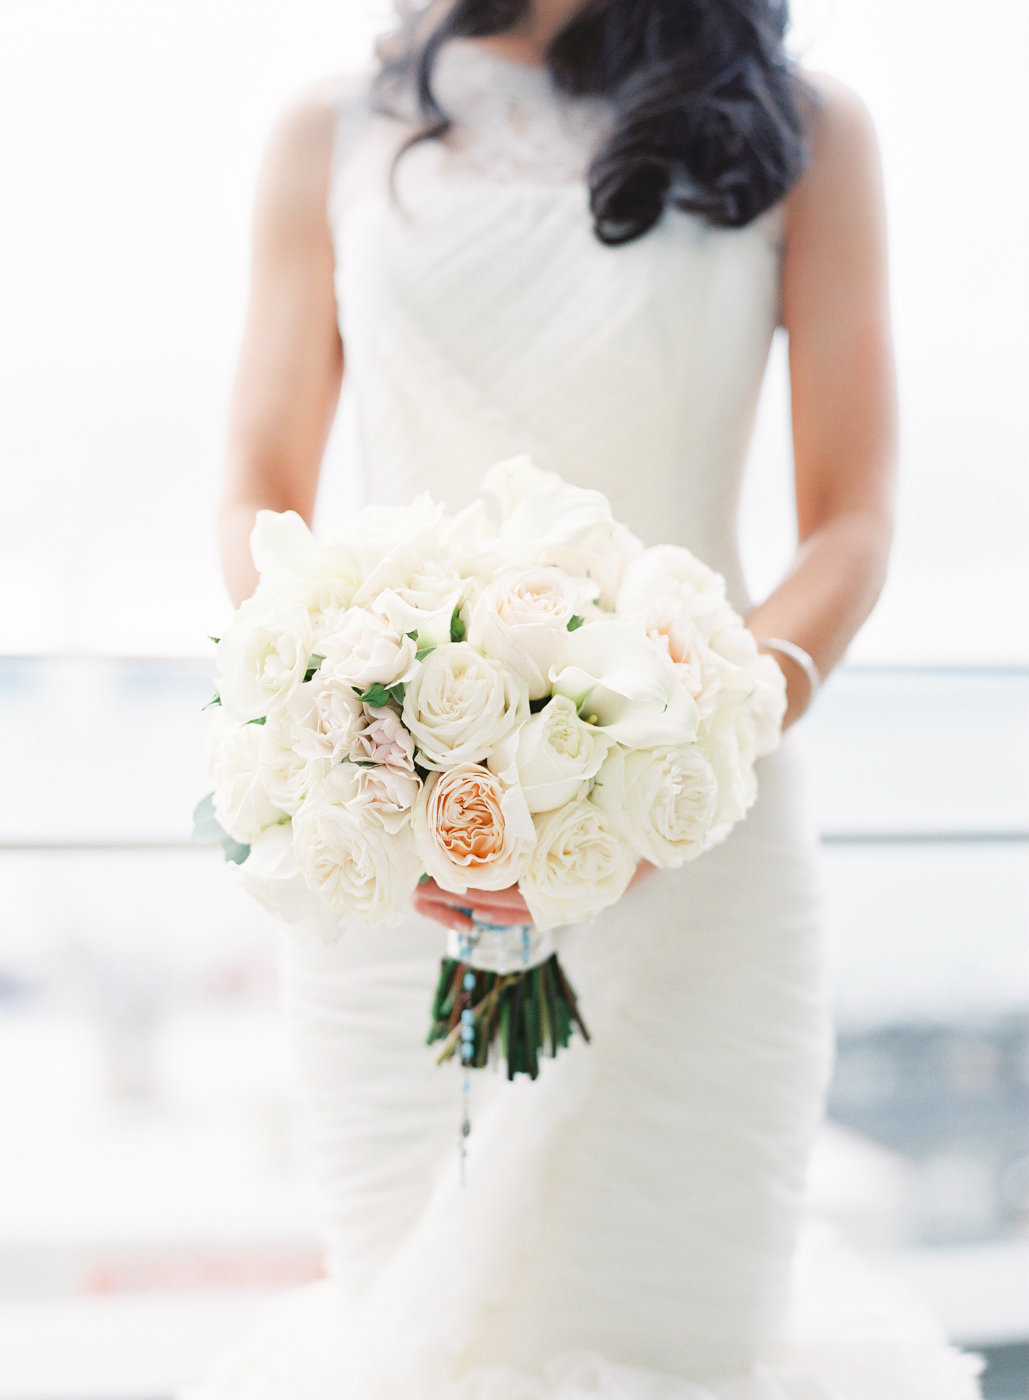 Classic pave rounded rose bridal bouquet in whites and blush.